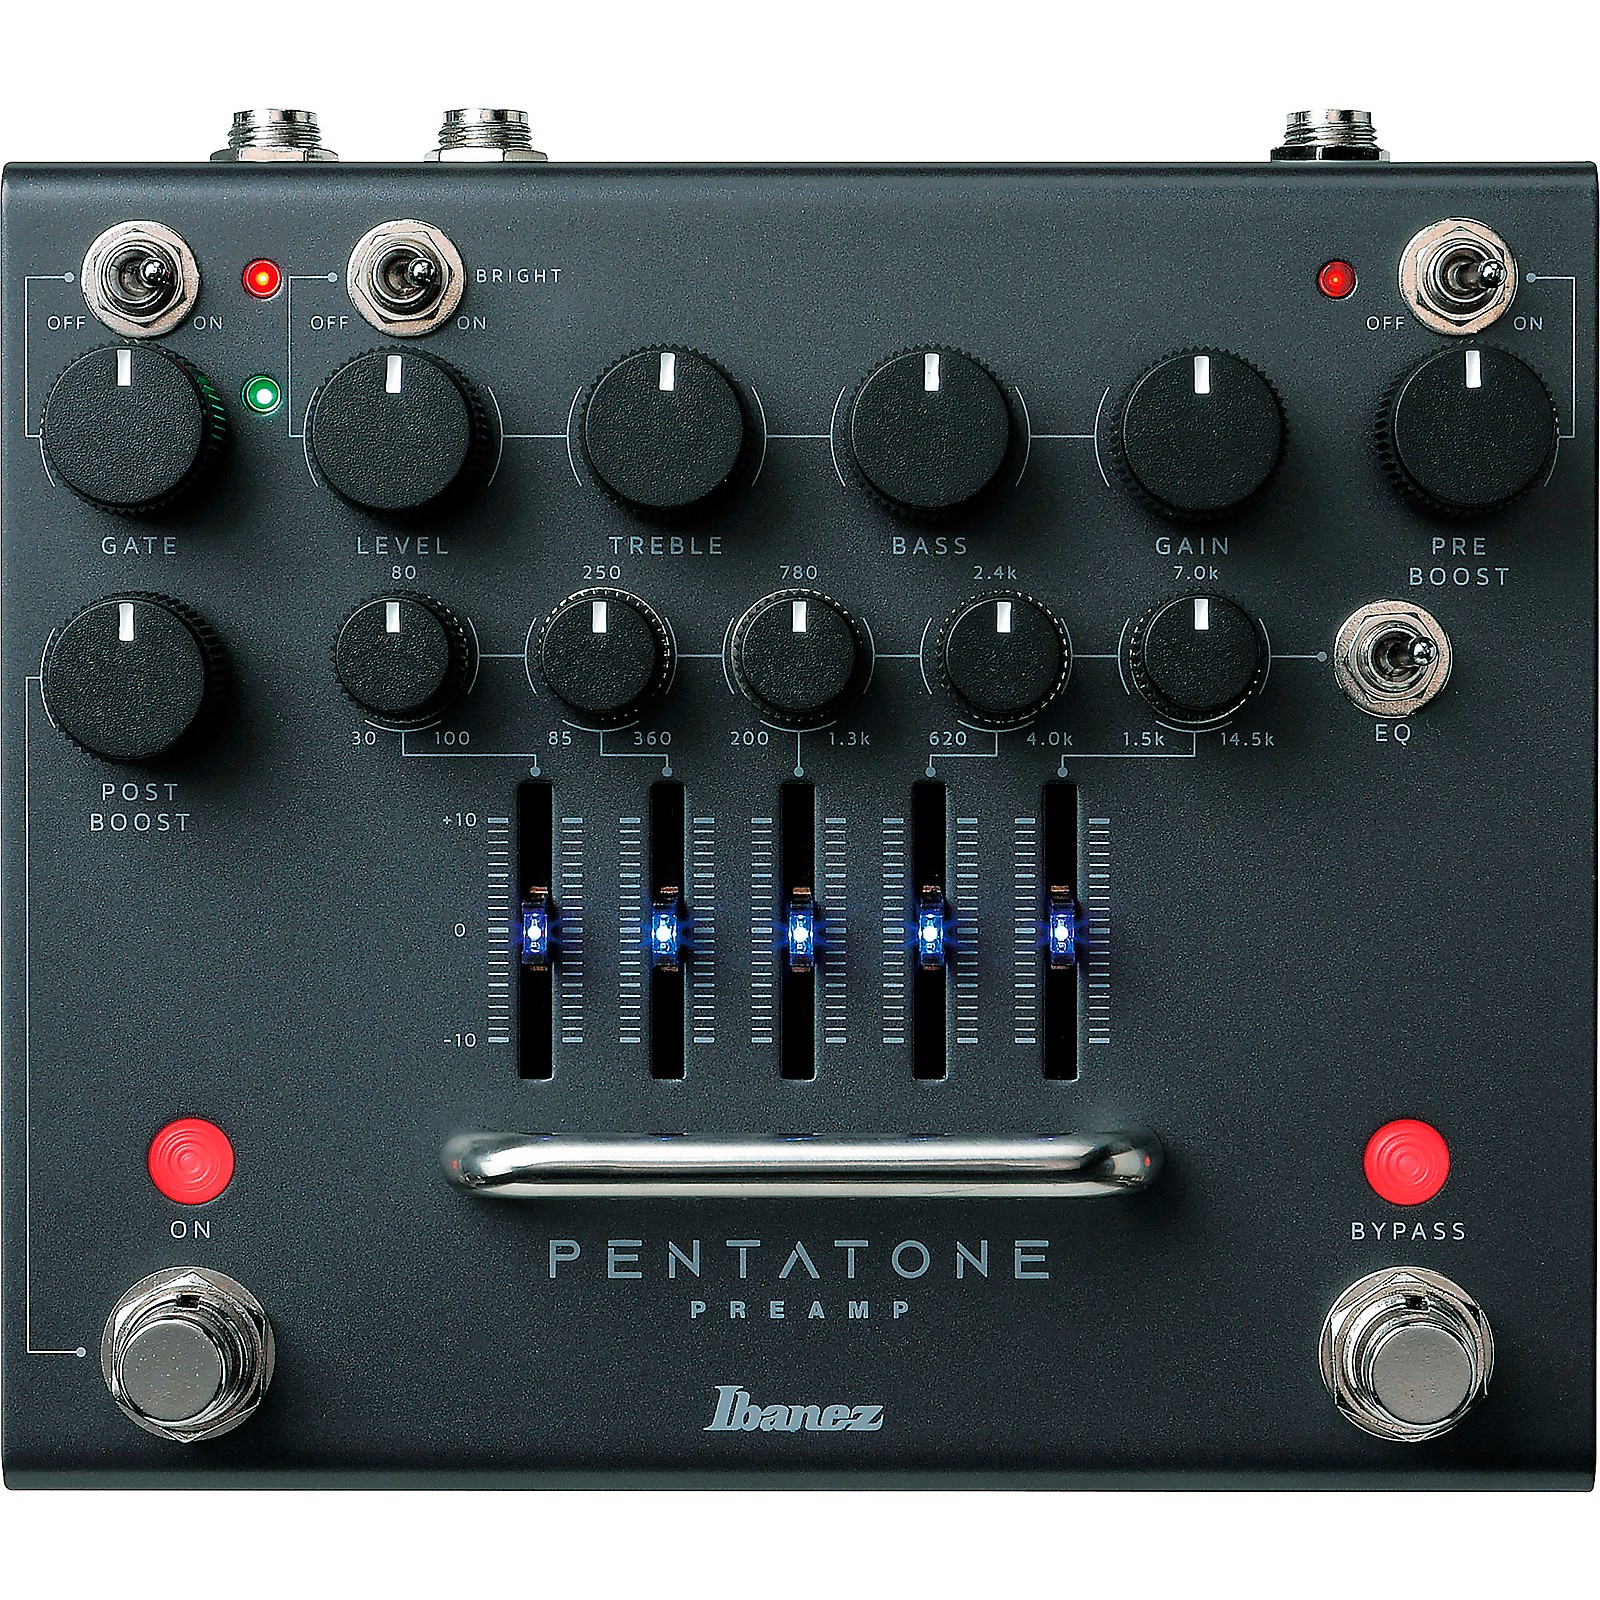 Ibanez Ibanez Pentatone Preamp Distortion Effects Pedal